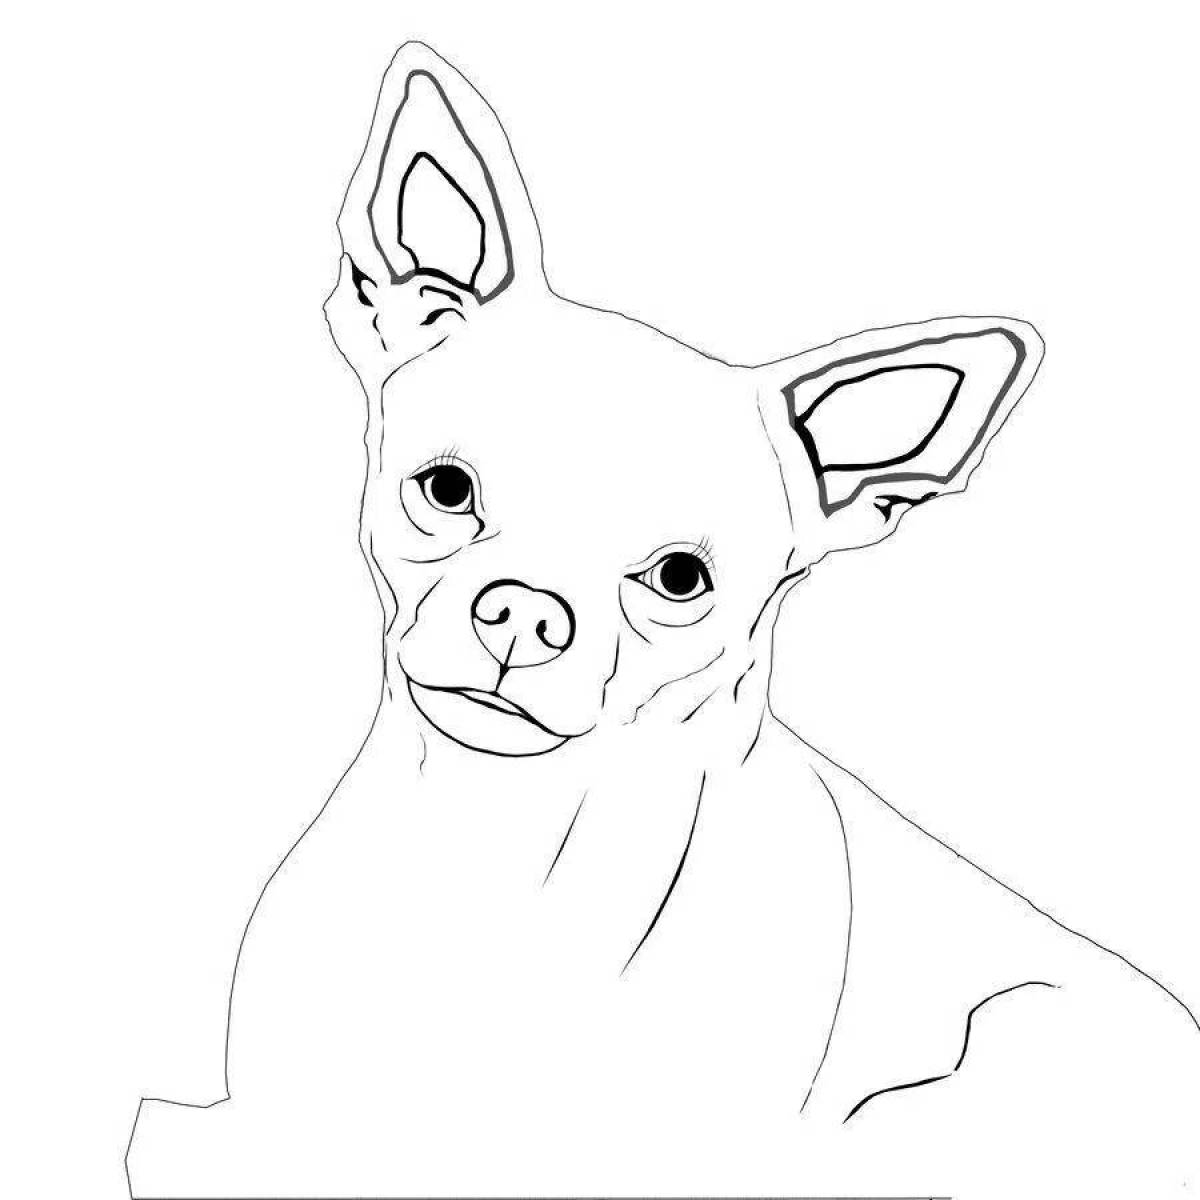 Awesome chihuahua coloring pages for kids